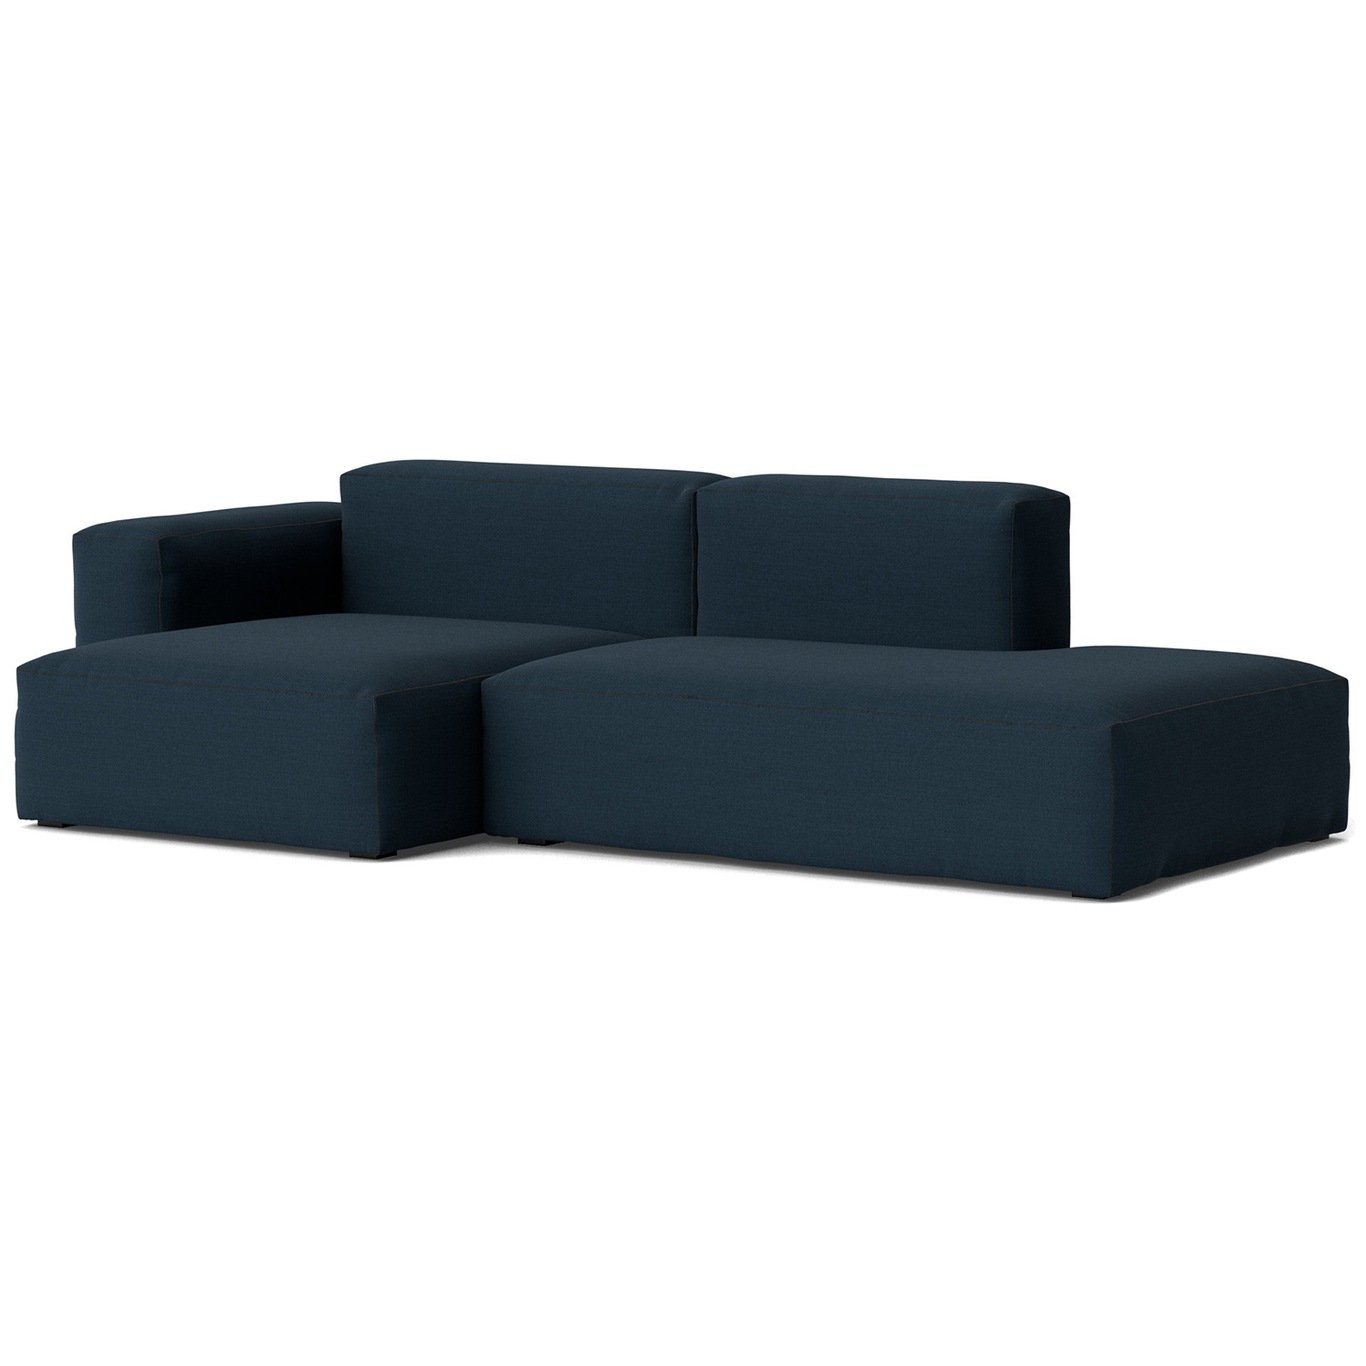 Mags Soft Low 2,5-personers Sofa Comb. 3 Venstre Divan, Steelcut Trio 796 / Sort Syning